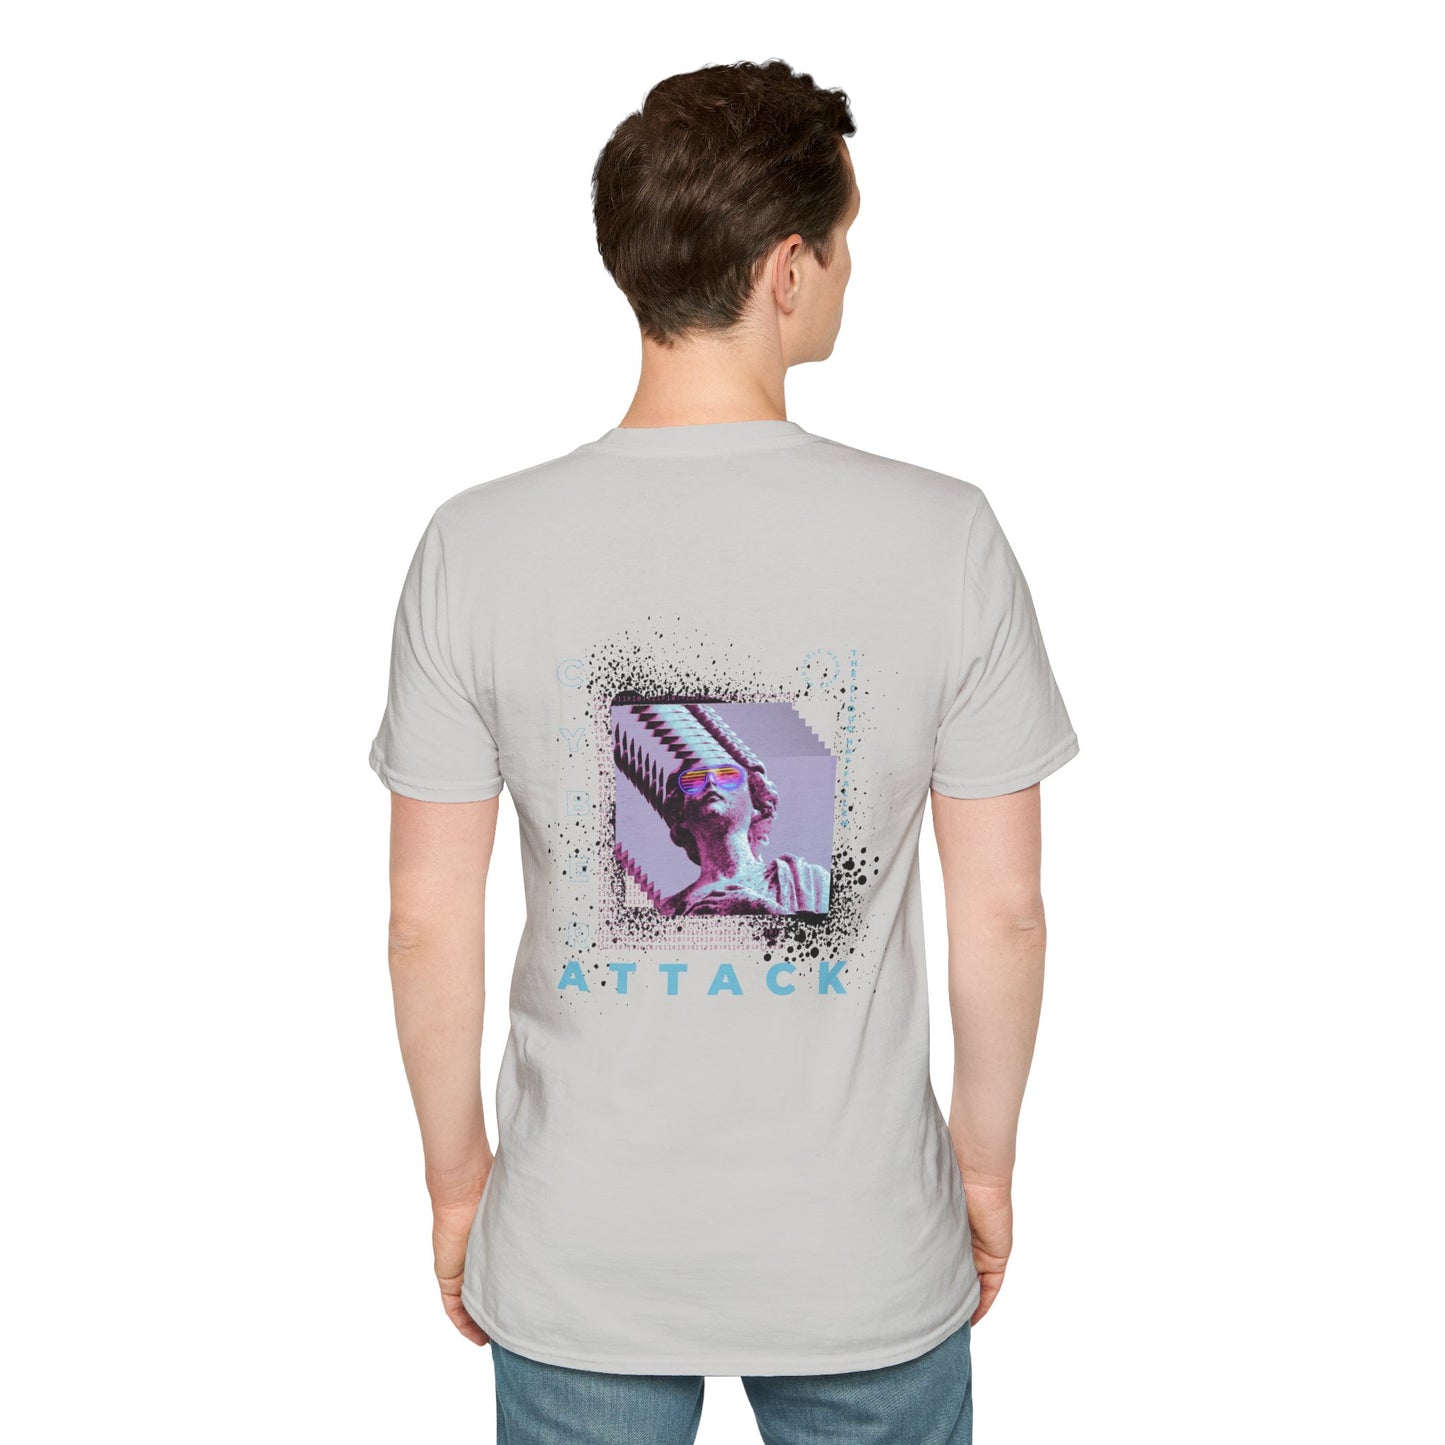 Light Grey T-shirt with a pixelated Statue of Liberty and modern glitch art design